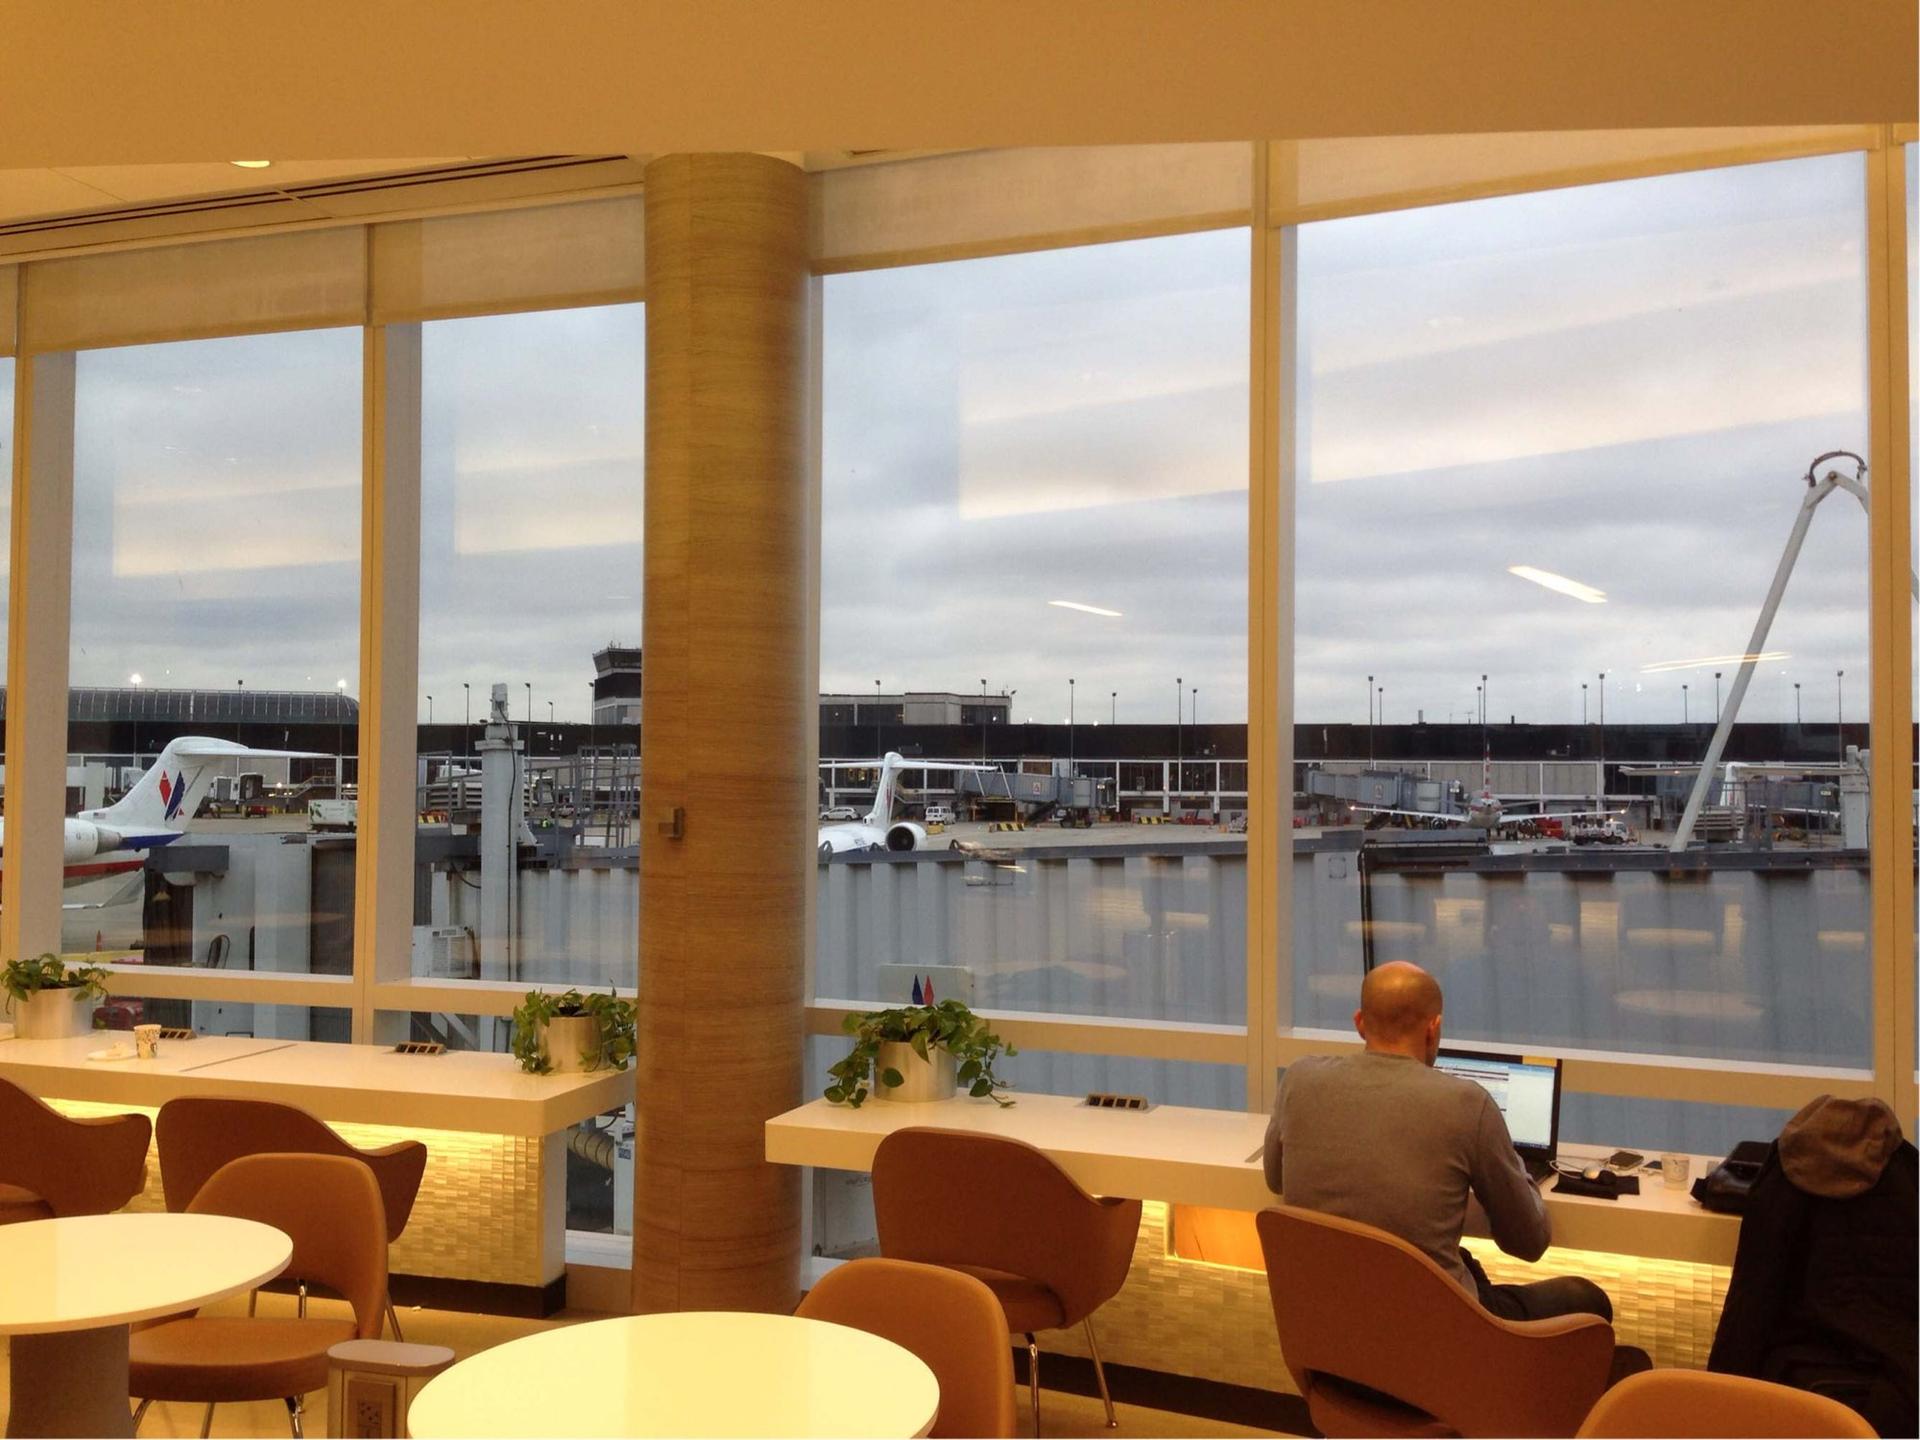 American Airlines Admirals Club image 17 of 50